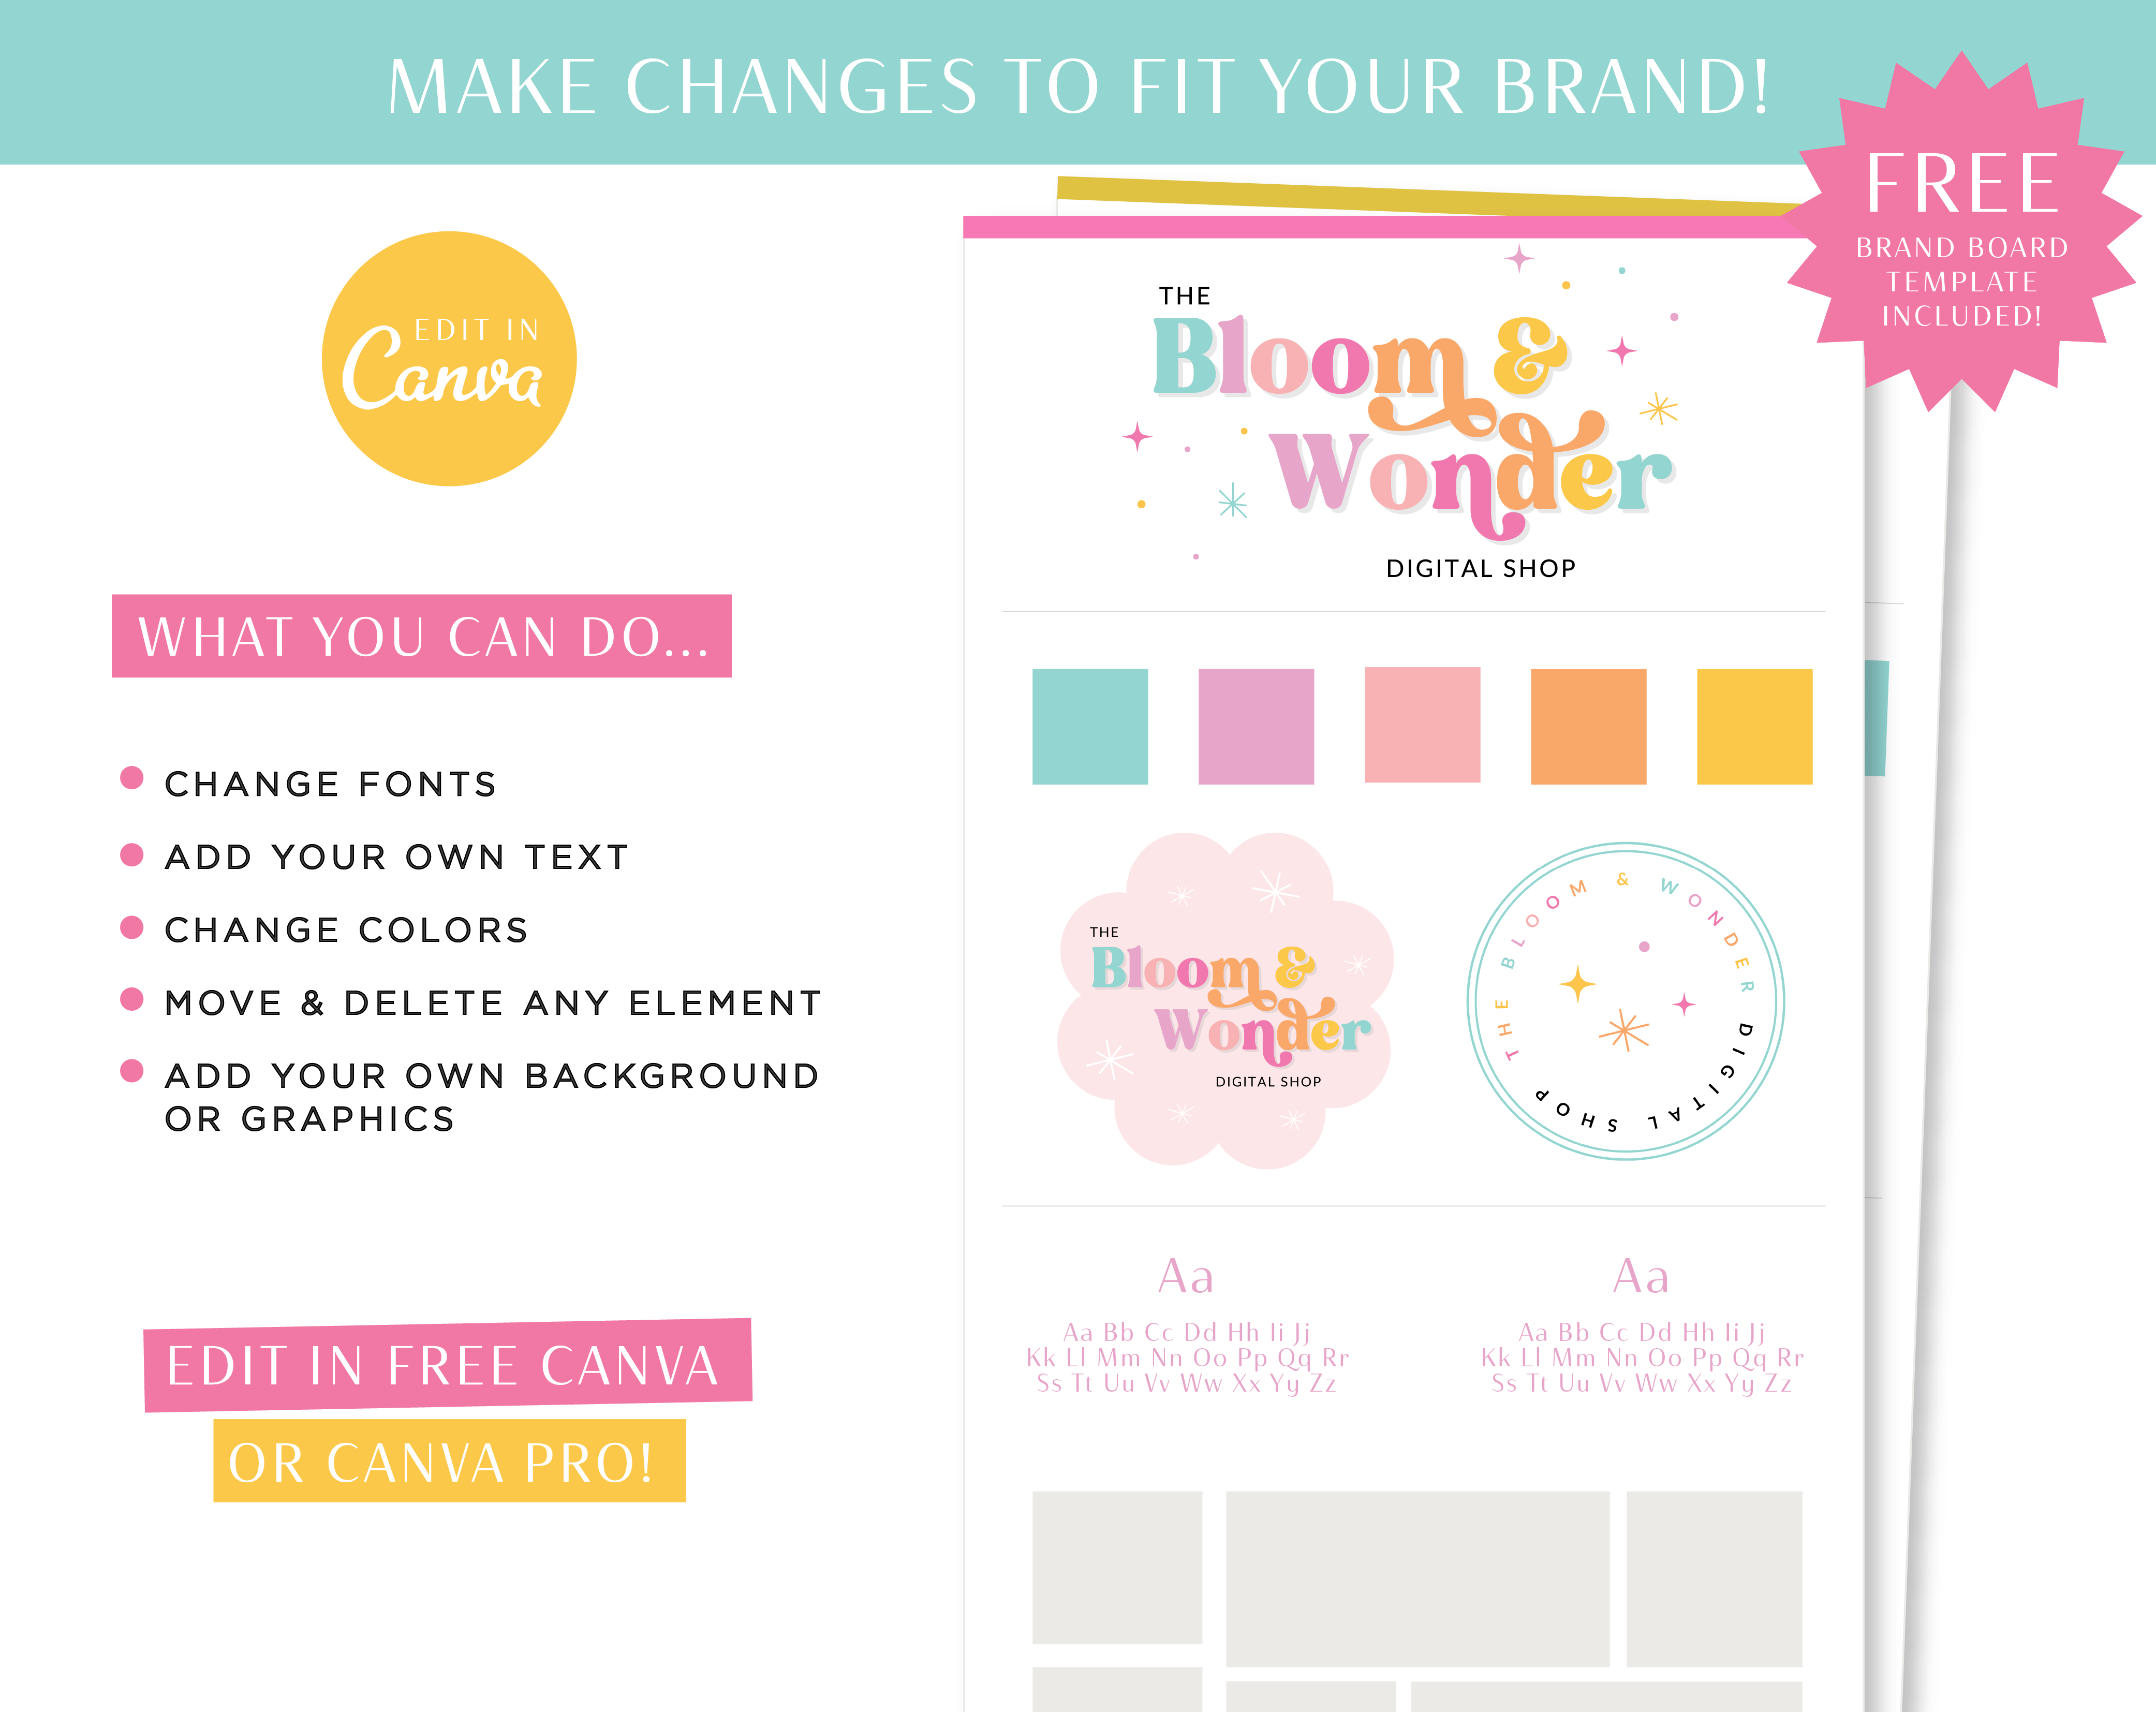 Editable bright boho logo design to edit in Canva, and free brand board design. Edit your own Custom logo with your business name using our stunning template designs.